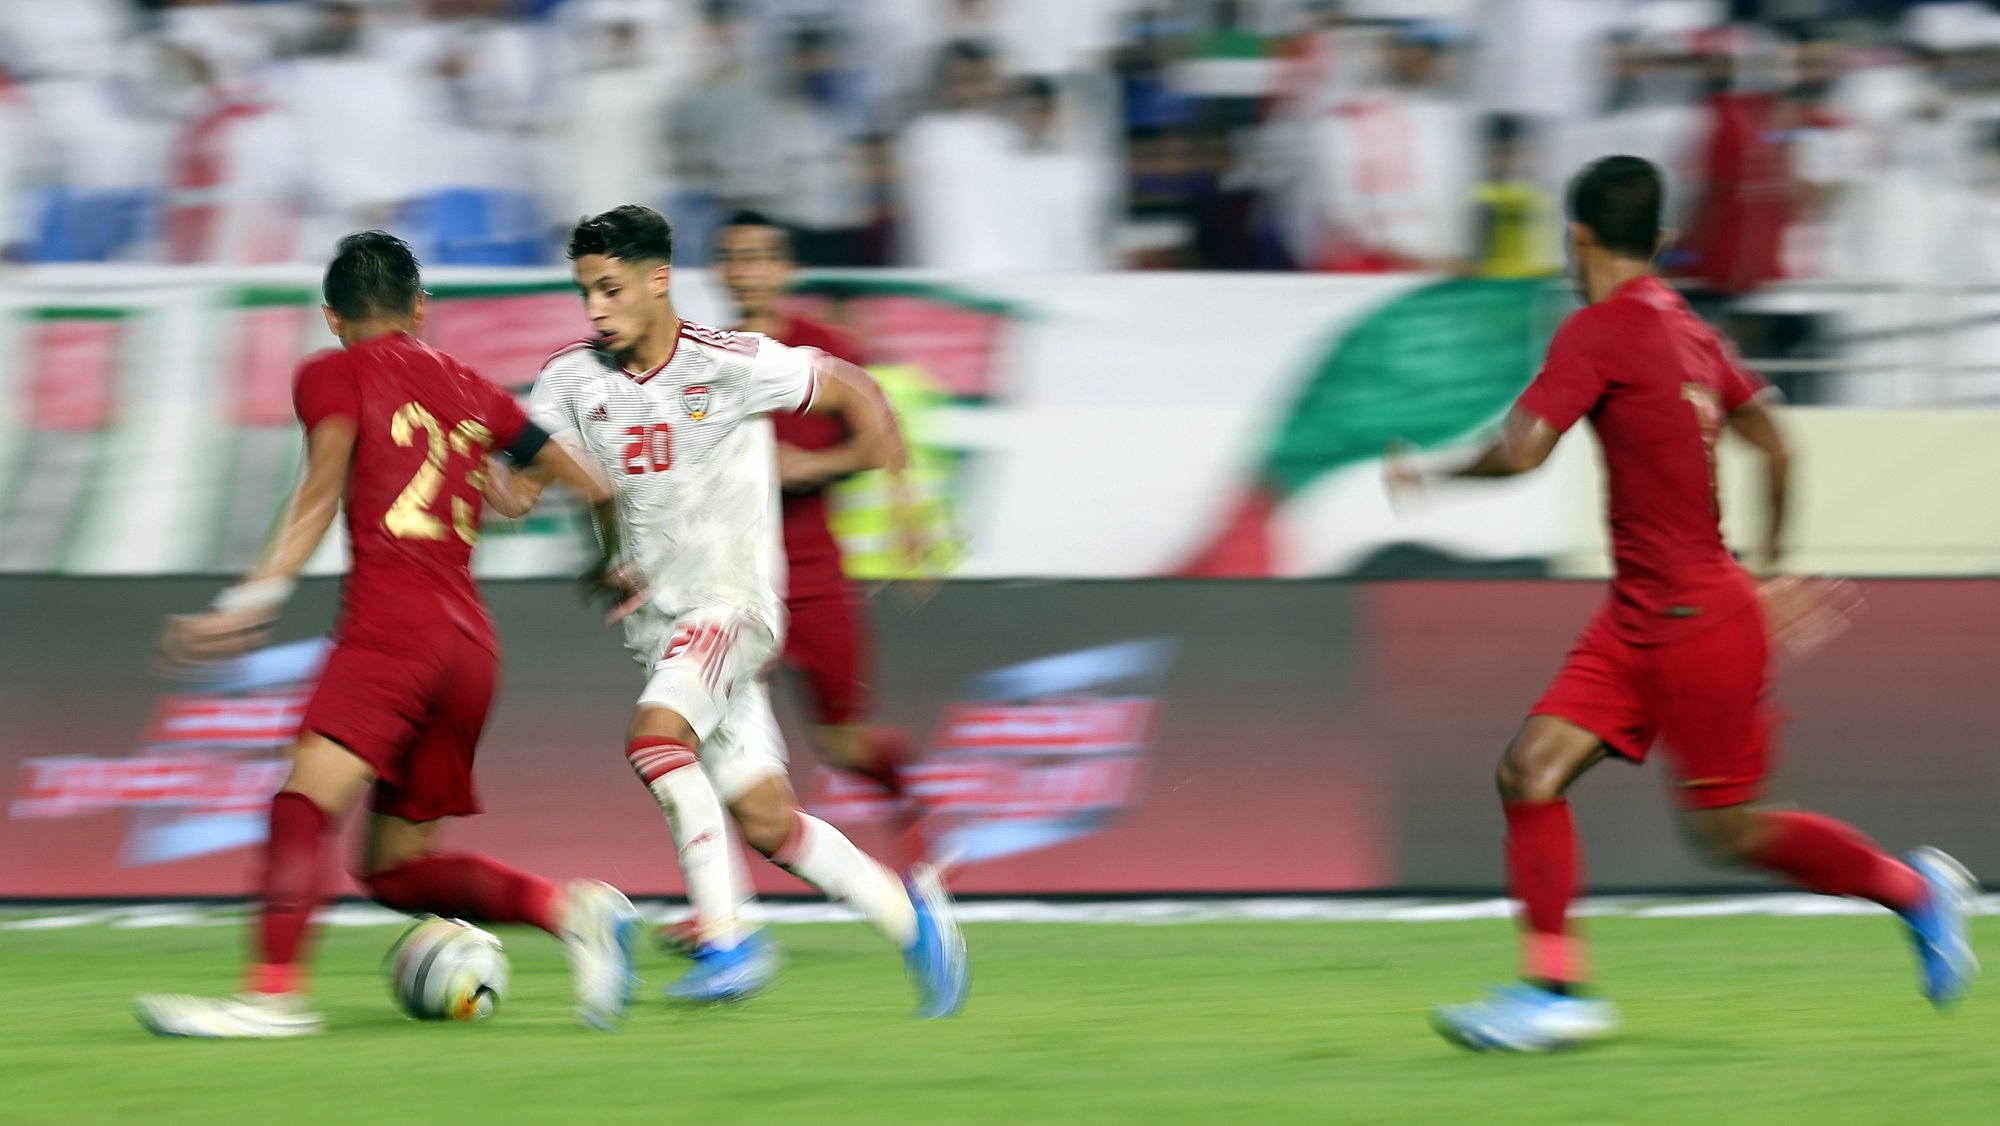 epa07911016 Ali Amro of UAE in action (2-L) during the FIFA World Cup 2022 and AFC Asian Cup 2023 qualifier soccer match group G between UAE and Indonesia in Dubai, United Arab Emirates on 10 October 2019.  EPA/ALI HAIDER